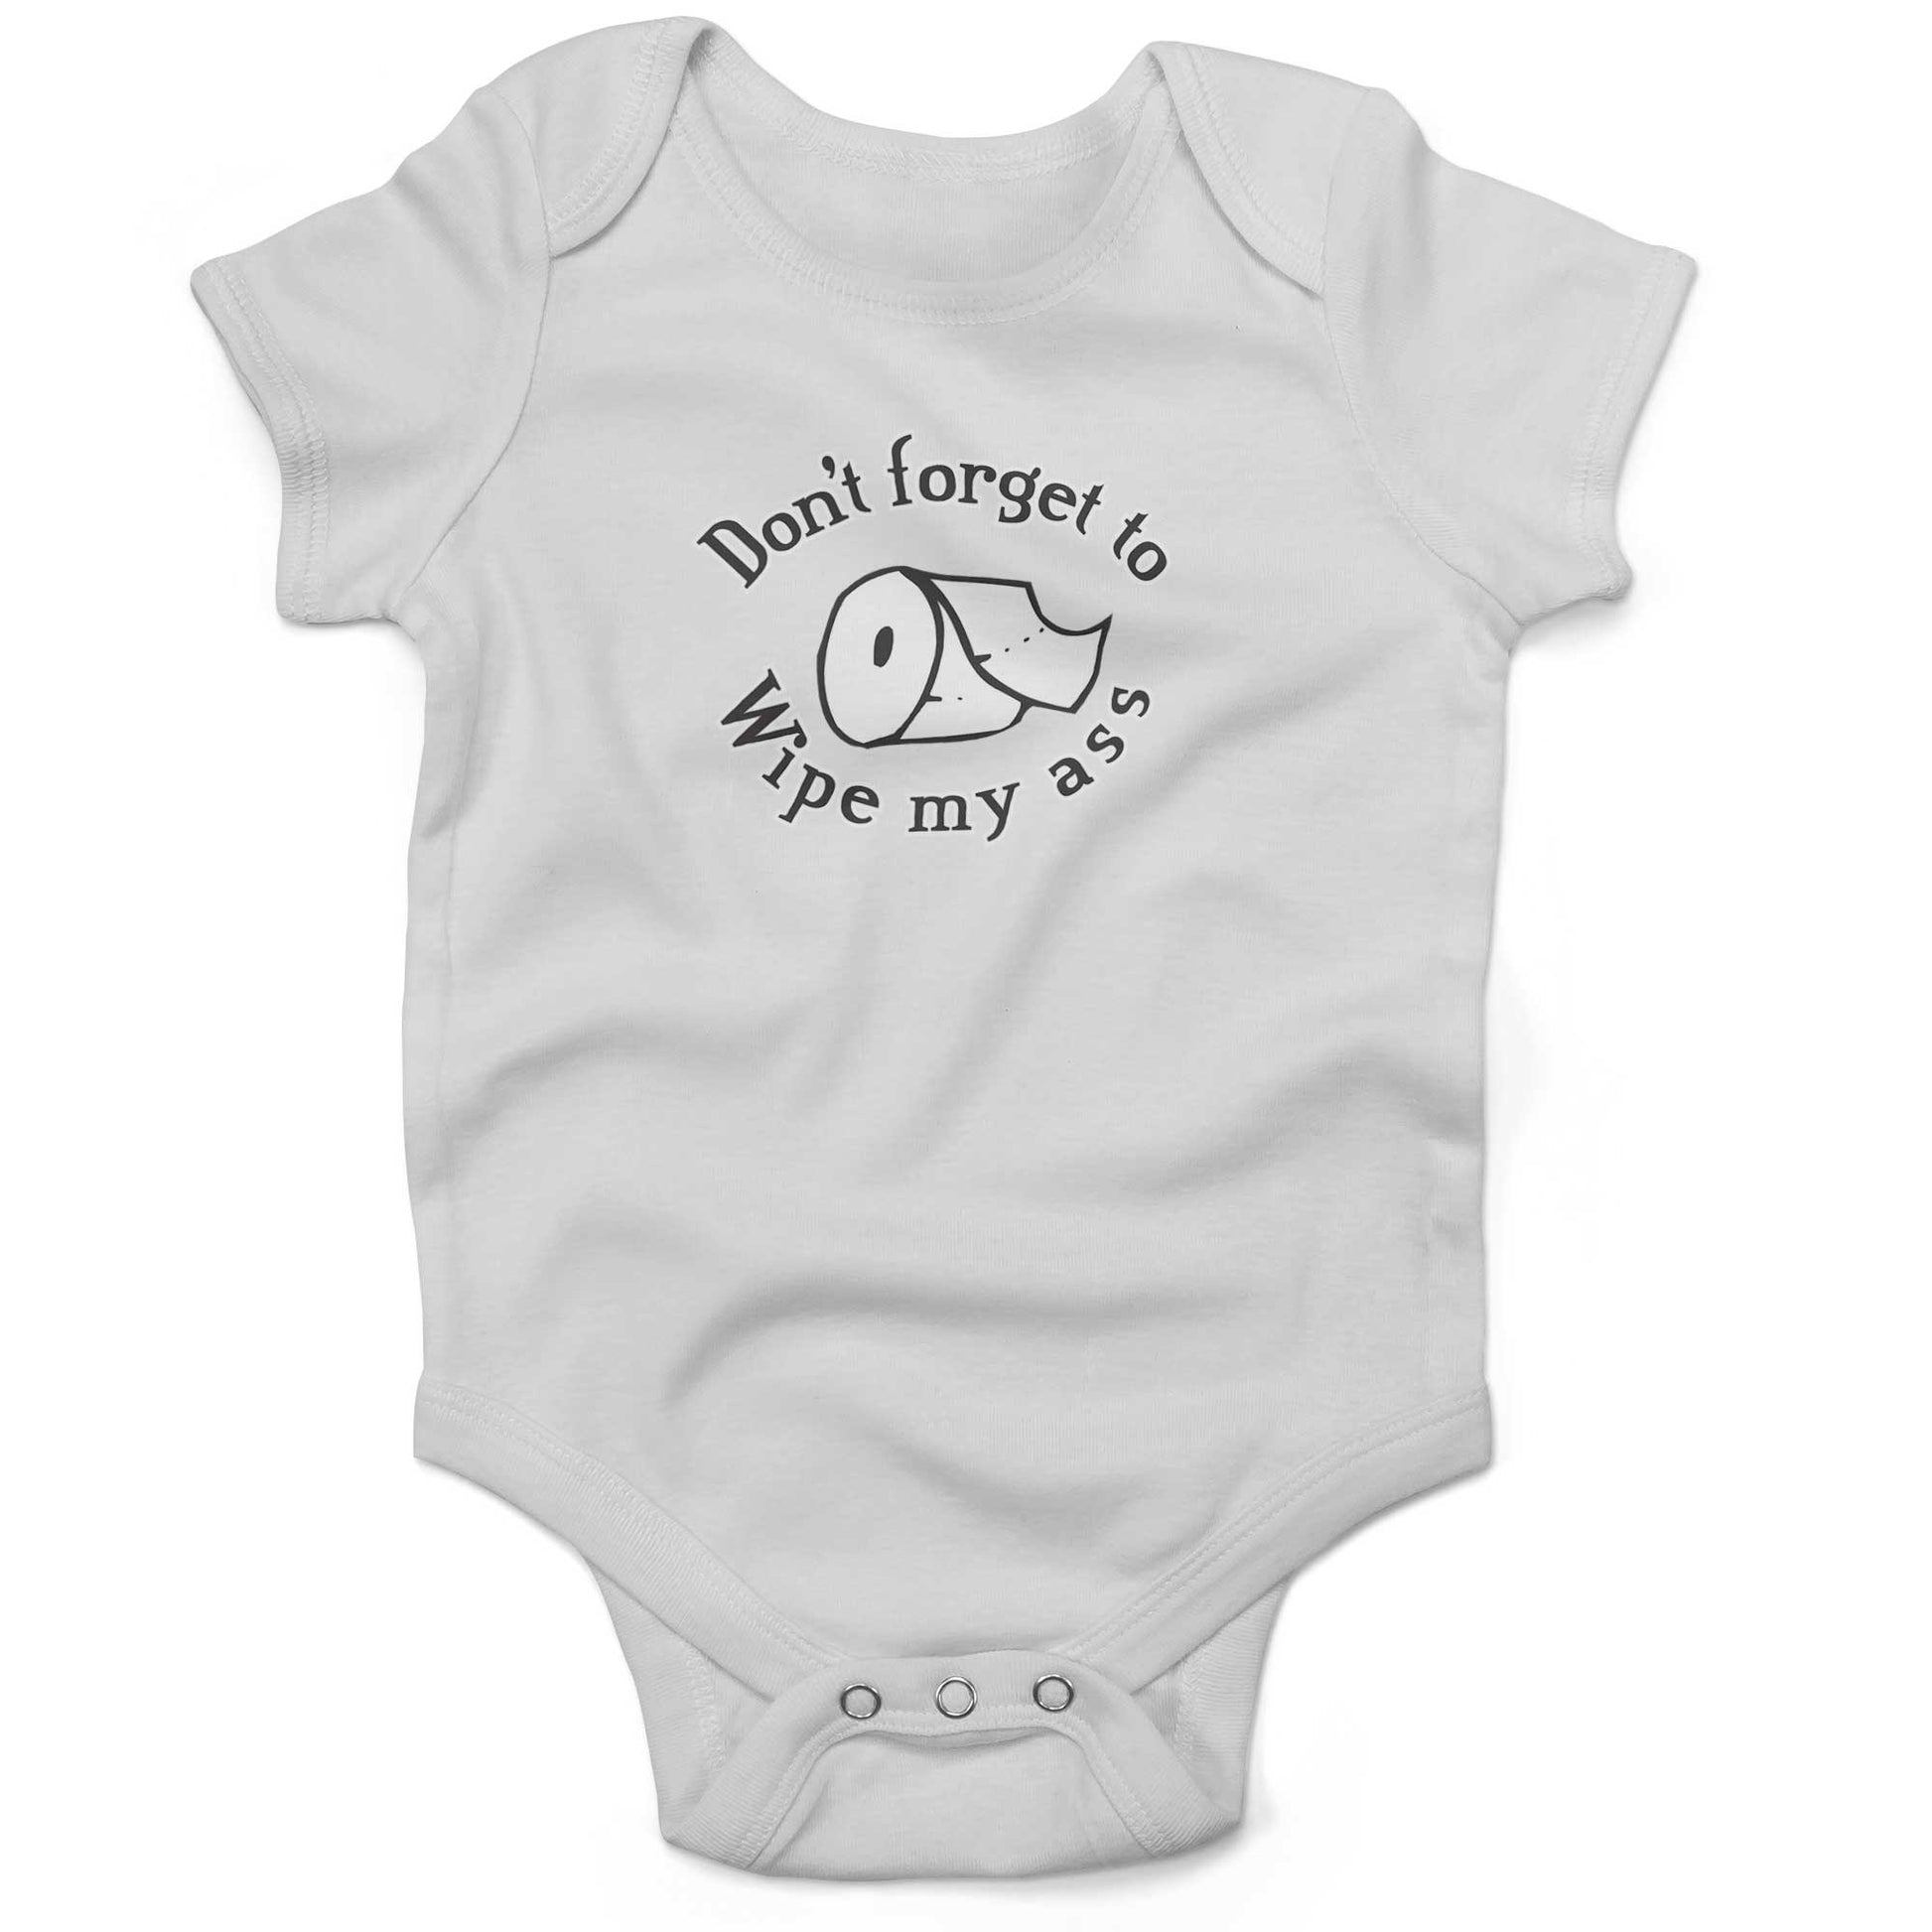 Don't Forget To Wipe My Ass Infant Bodysuit or Raglan Tee-White-3-6 months